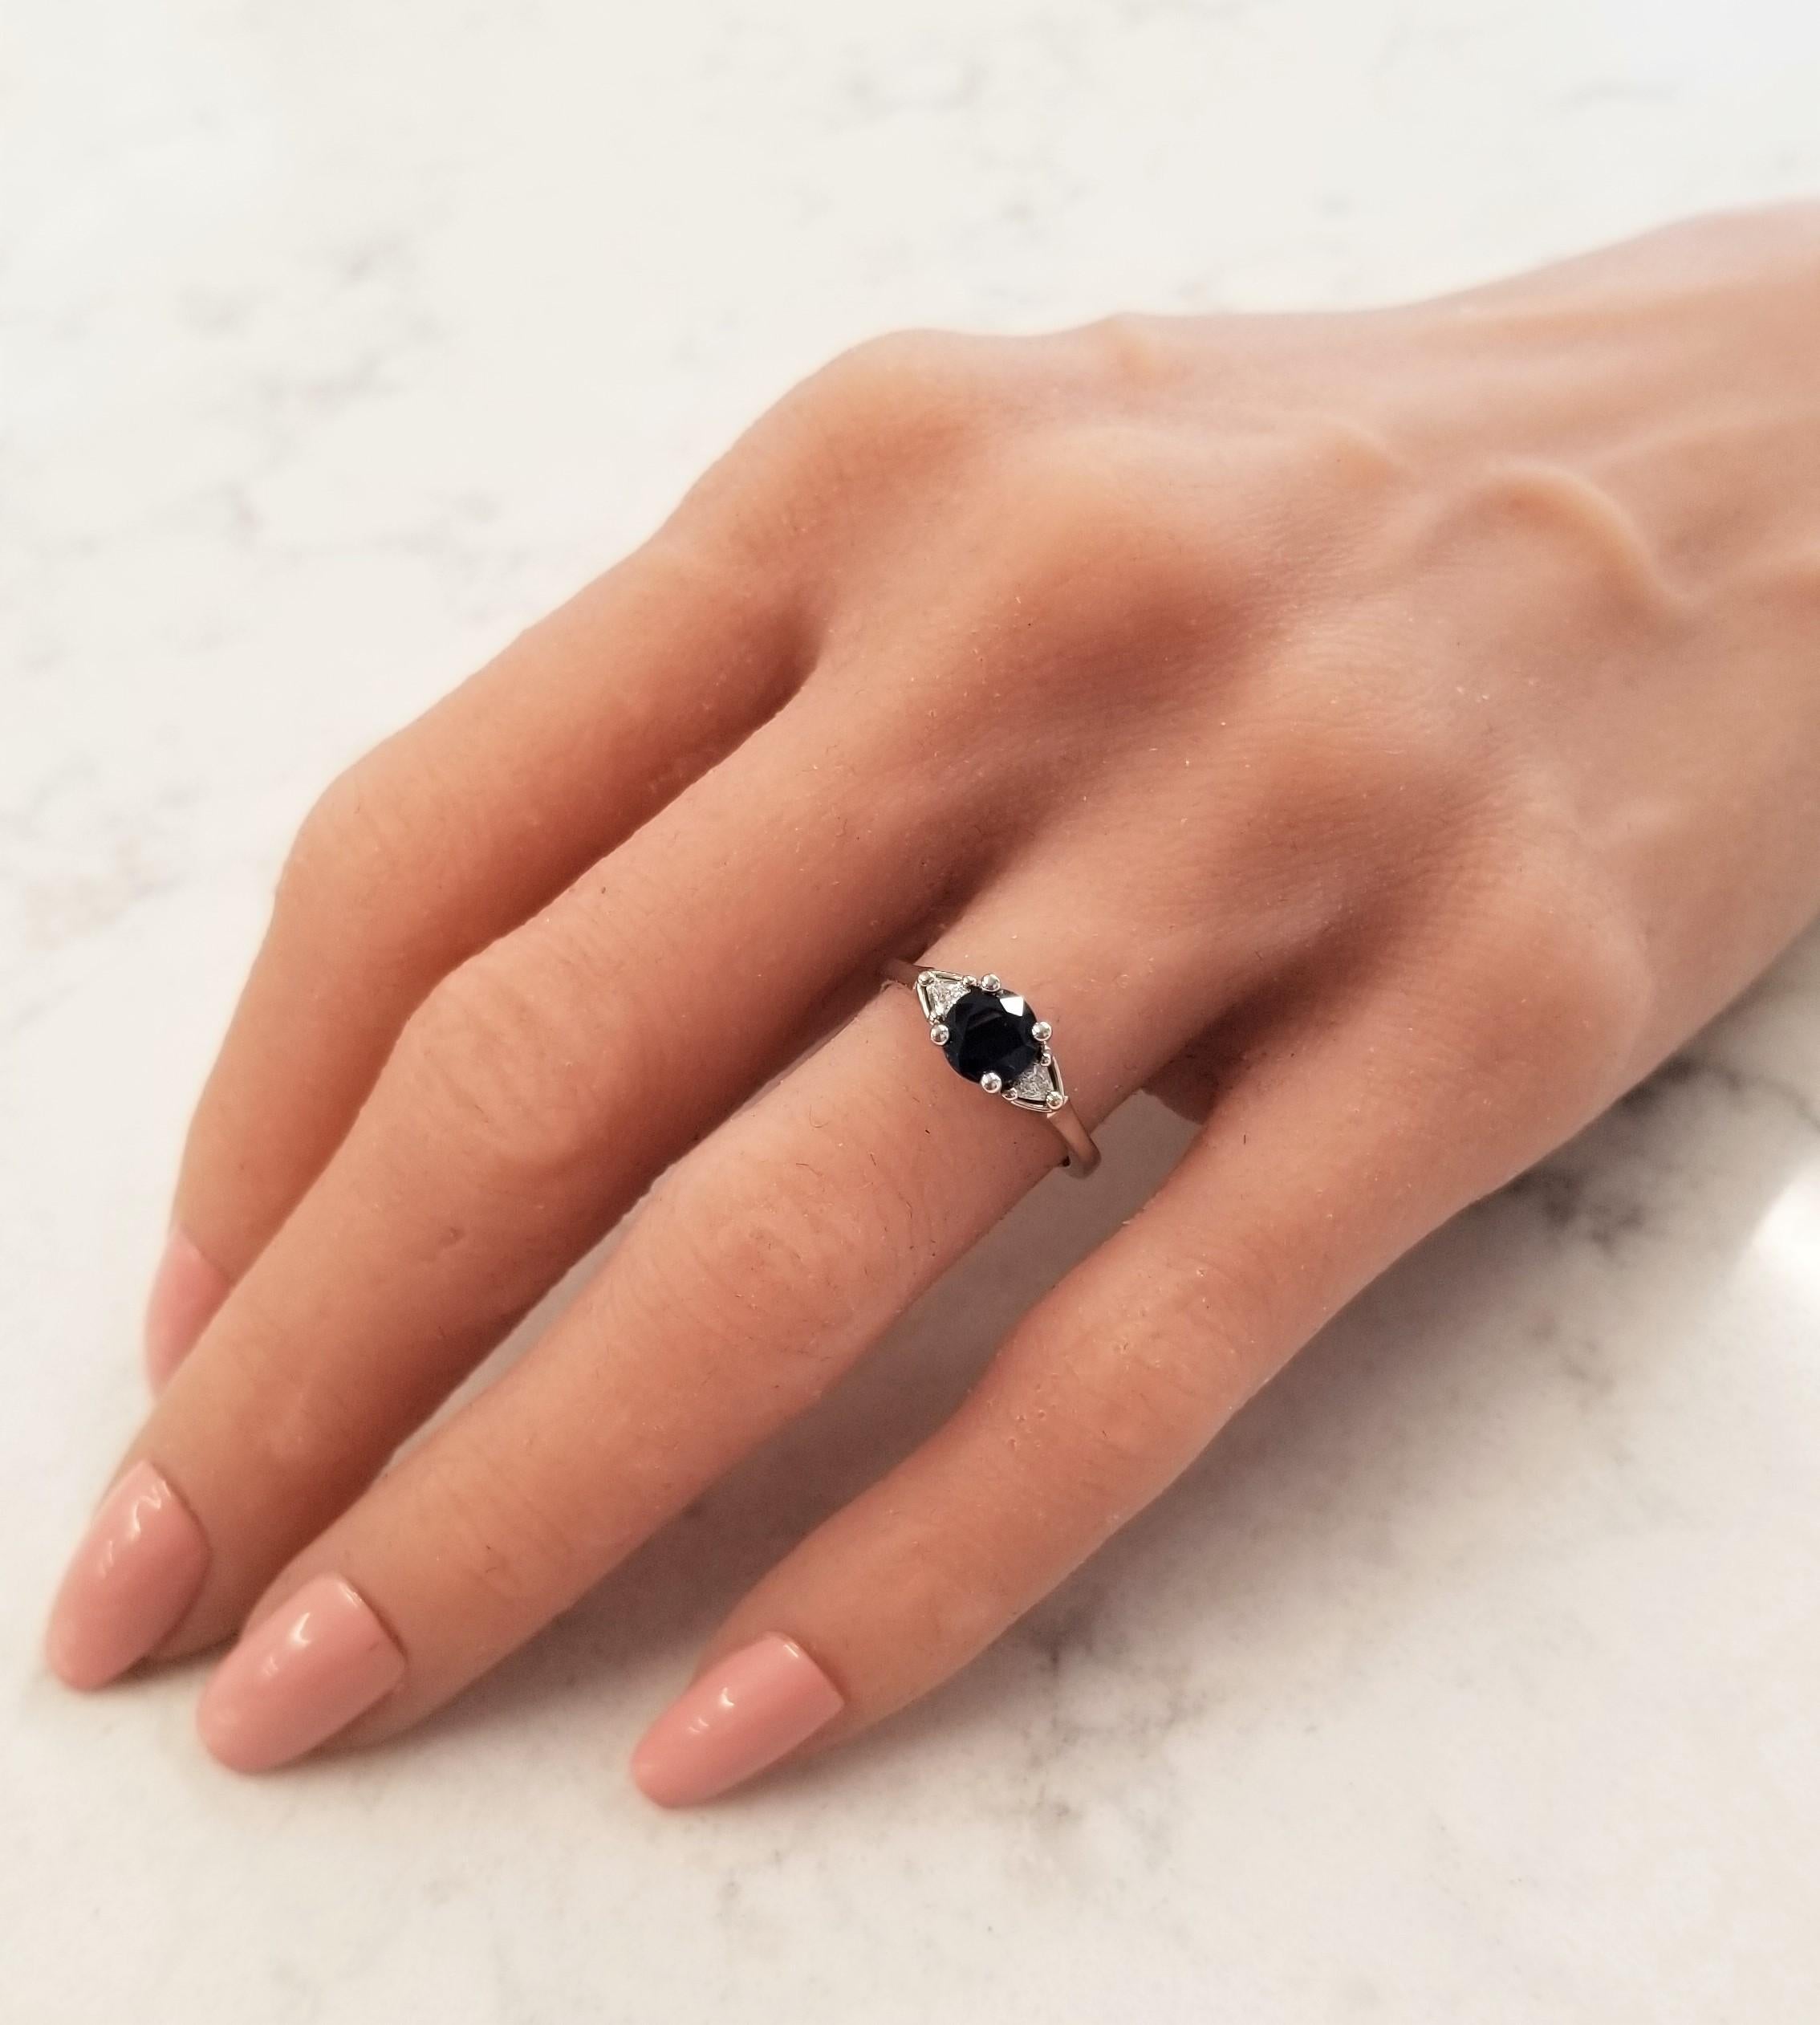 Simple, yet so elegant! This exceptional 3 stone ring will quickly become one of your favorite pieces of jewelry to wear or to gift. The star of this show is the vibrant 1.03 carat round sapphire, from Thailand, that sits in the center of the ring.